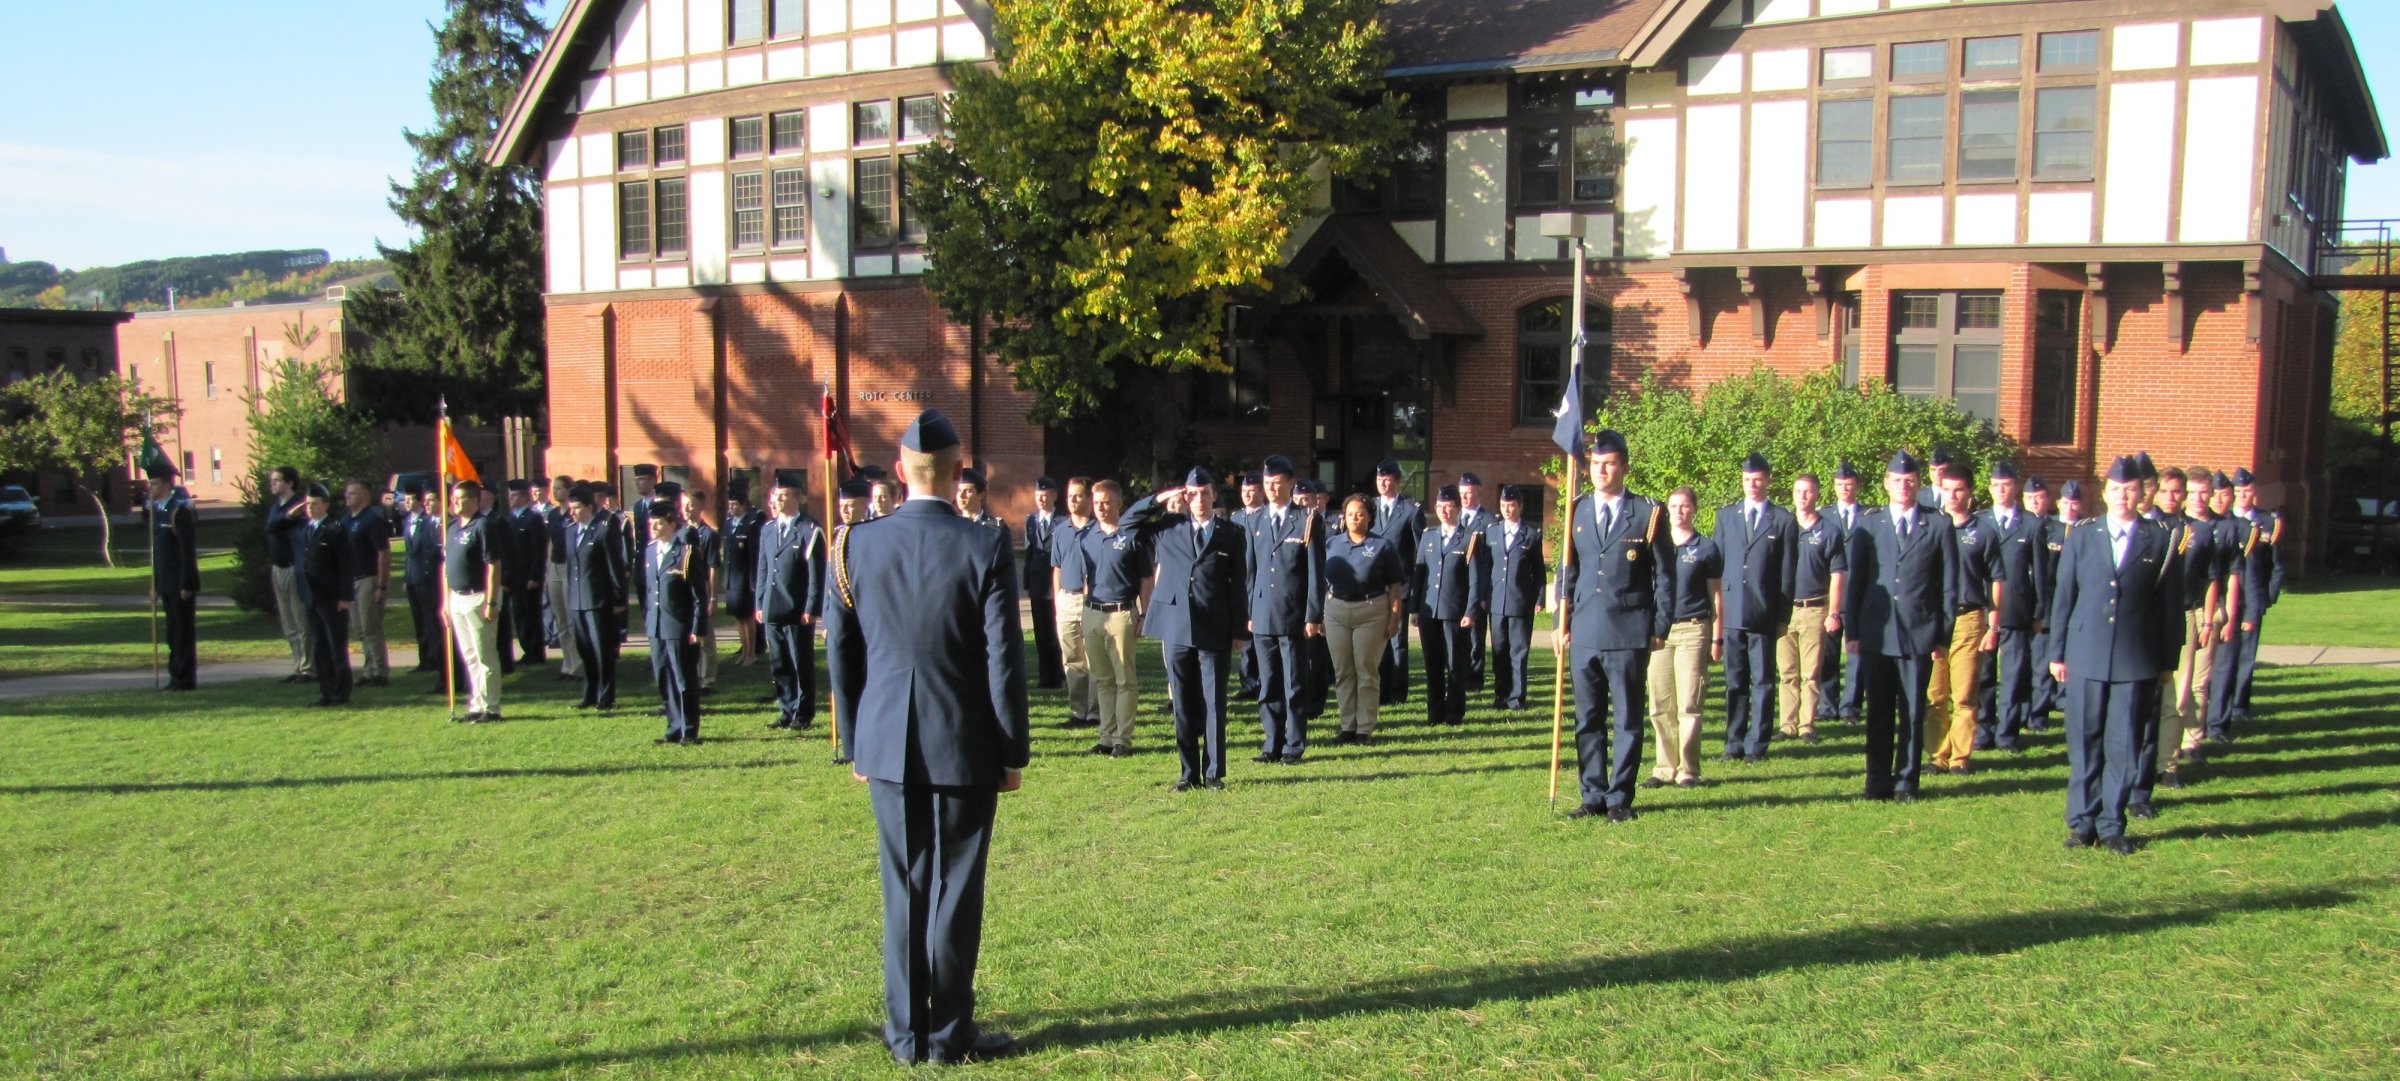 Cadets face student leadership on a sunny day in winter outside the ROTC building in miliary jackets and fatigues